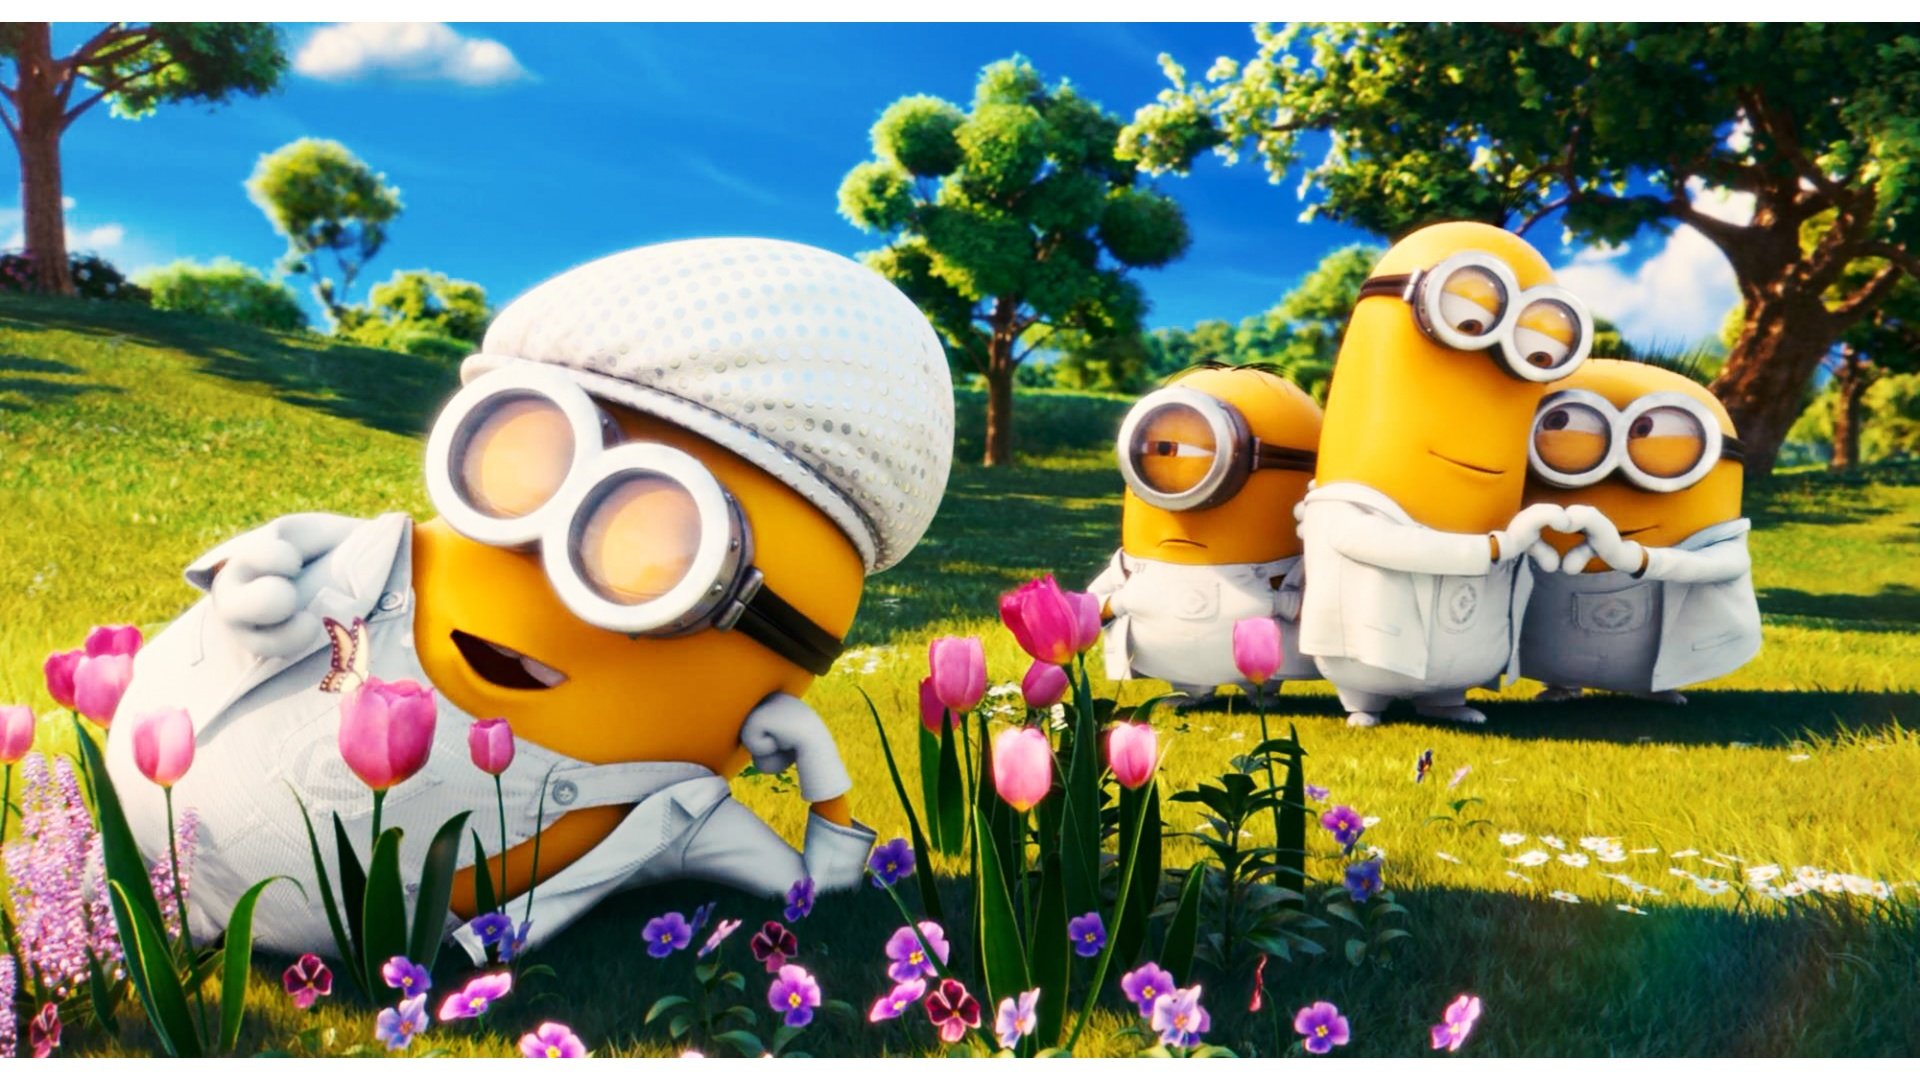 Free Download Romantic Minions Love Family Wallpapers Get and Search